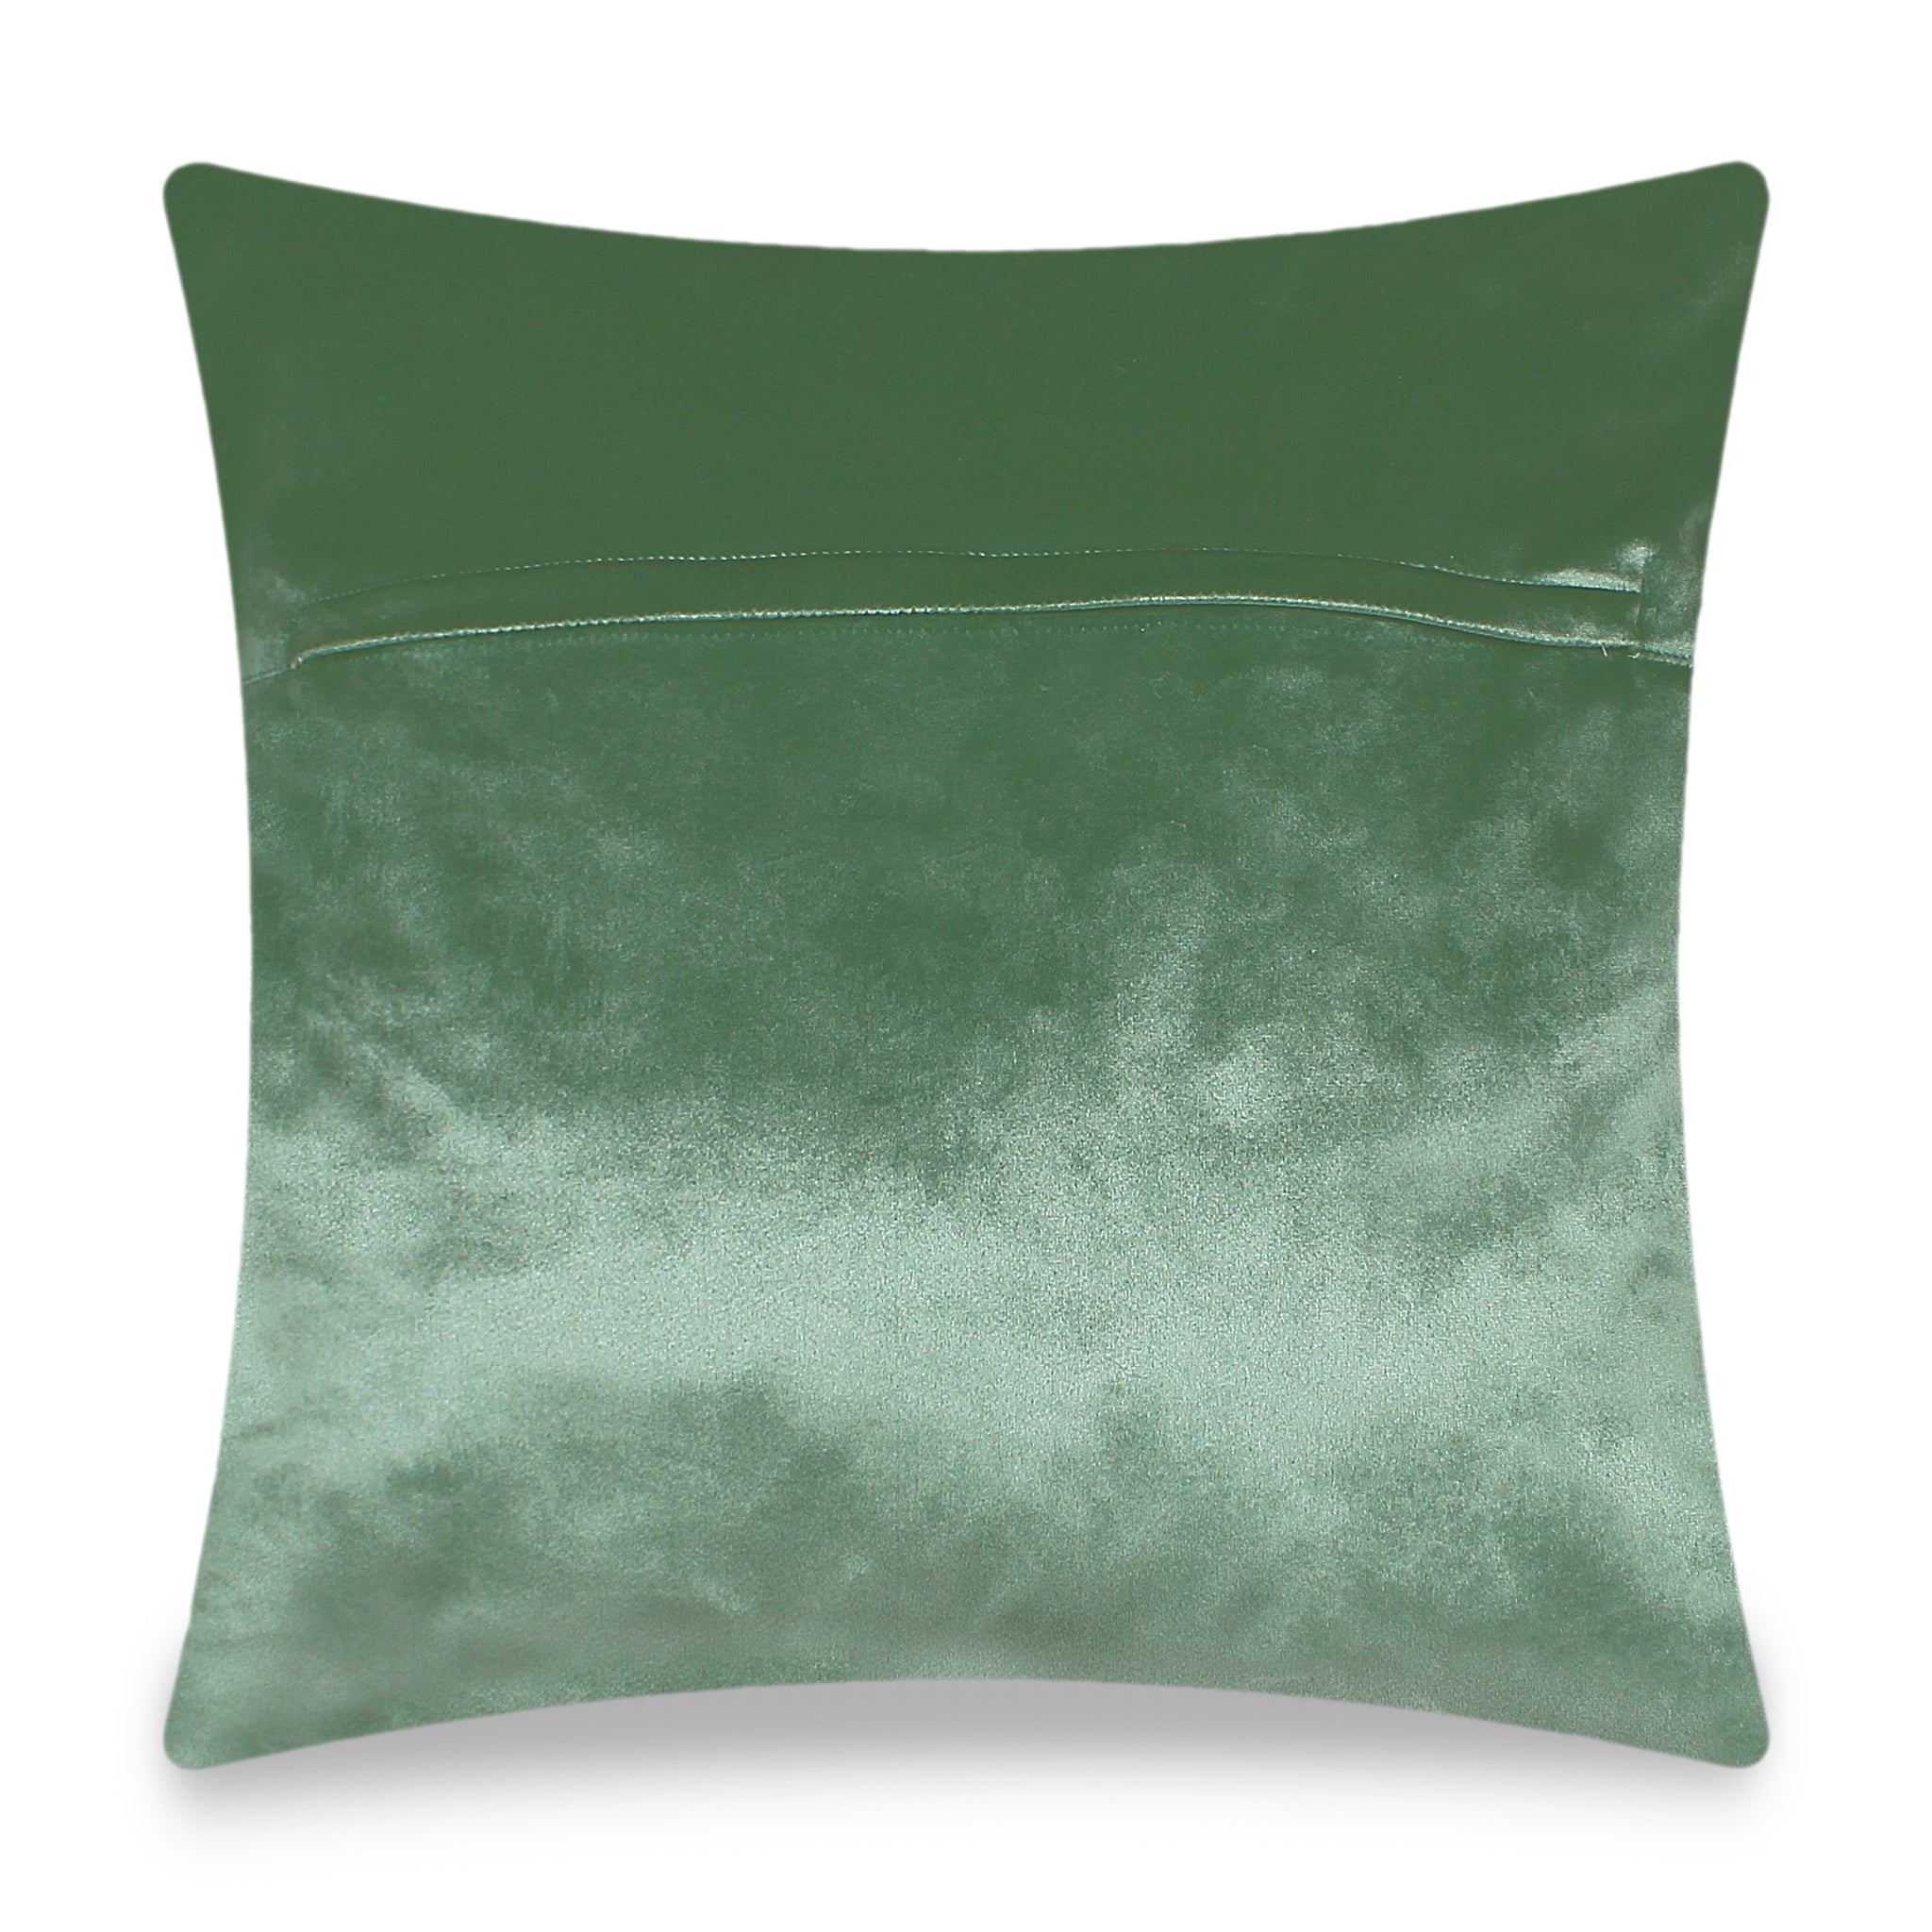 Green Velvet Cushion Cover, Hermes Inspired Horse Printed Decorative Pillow, Vintage Home Décor Throw Pillow Cover,  45 x 45 CM